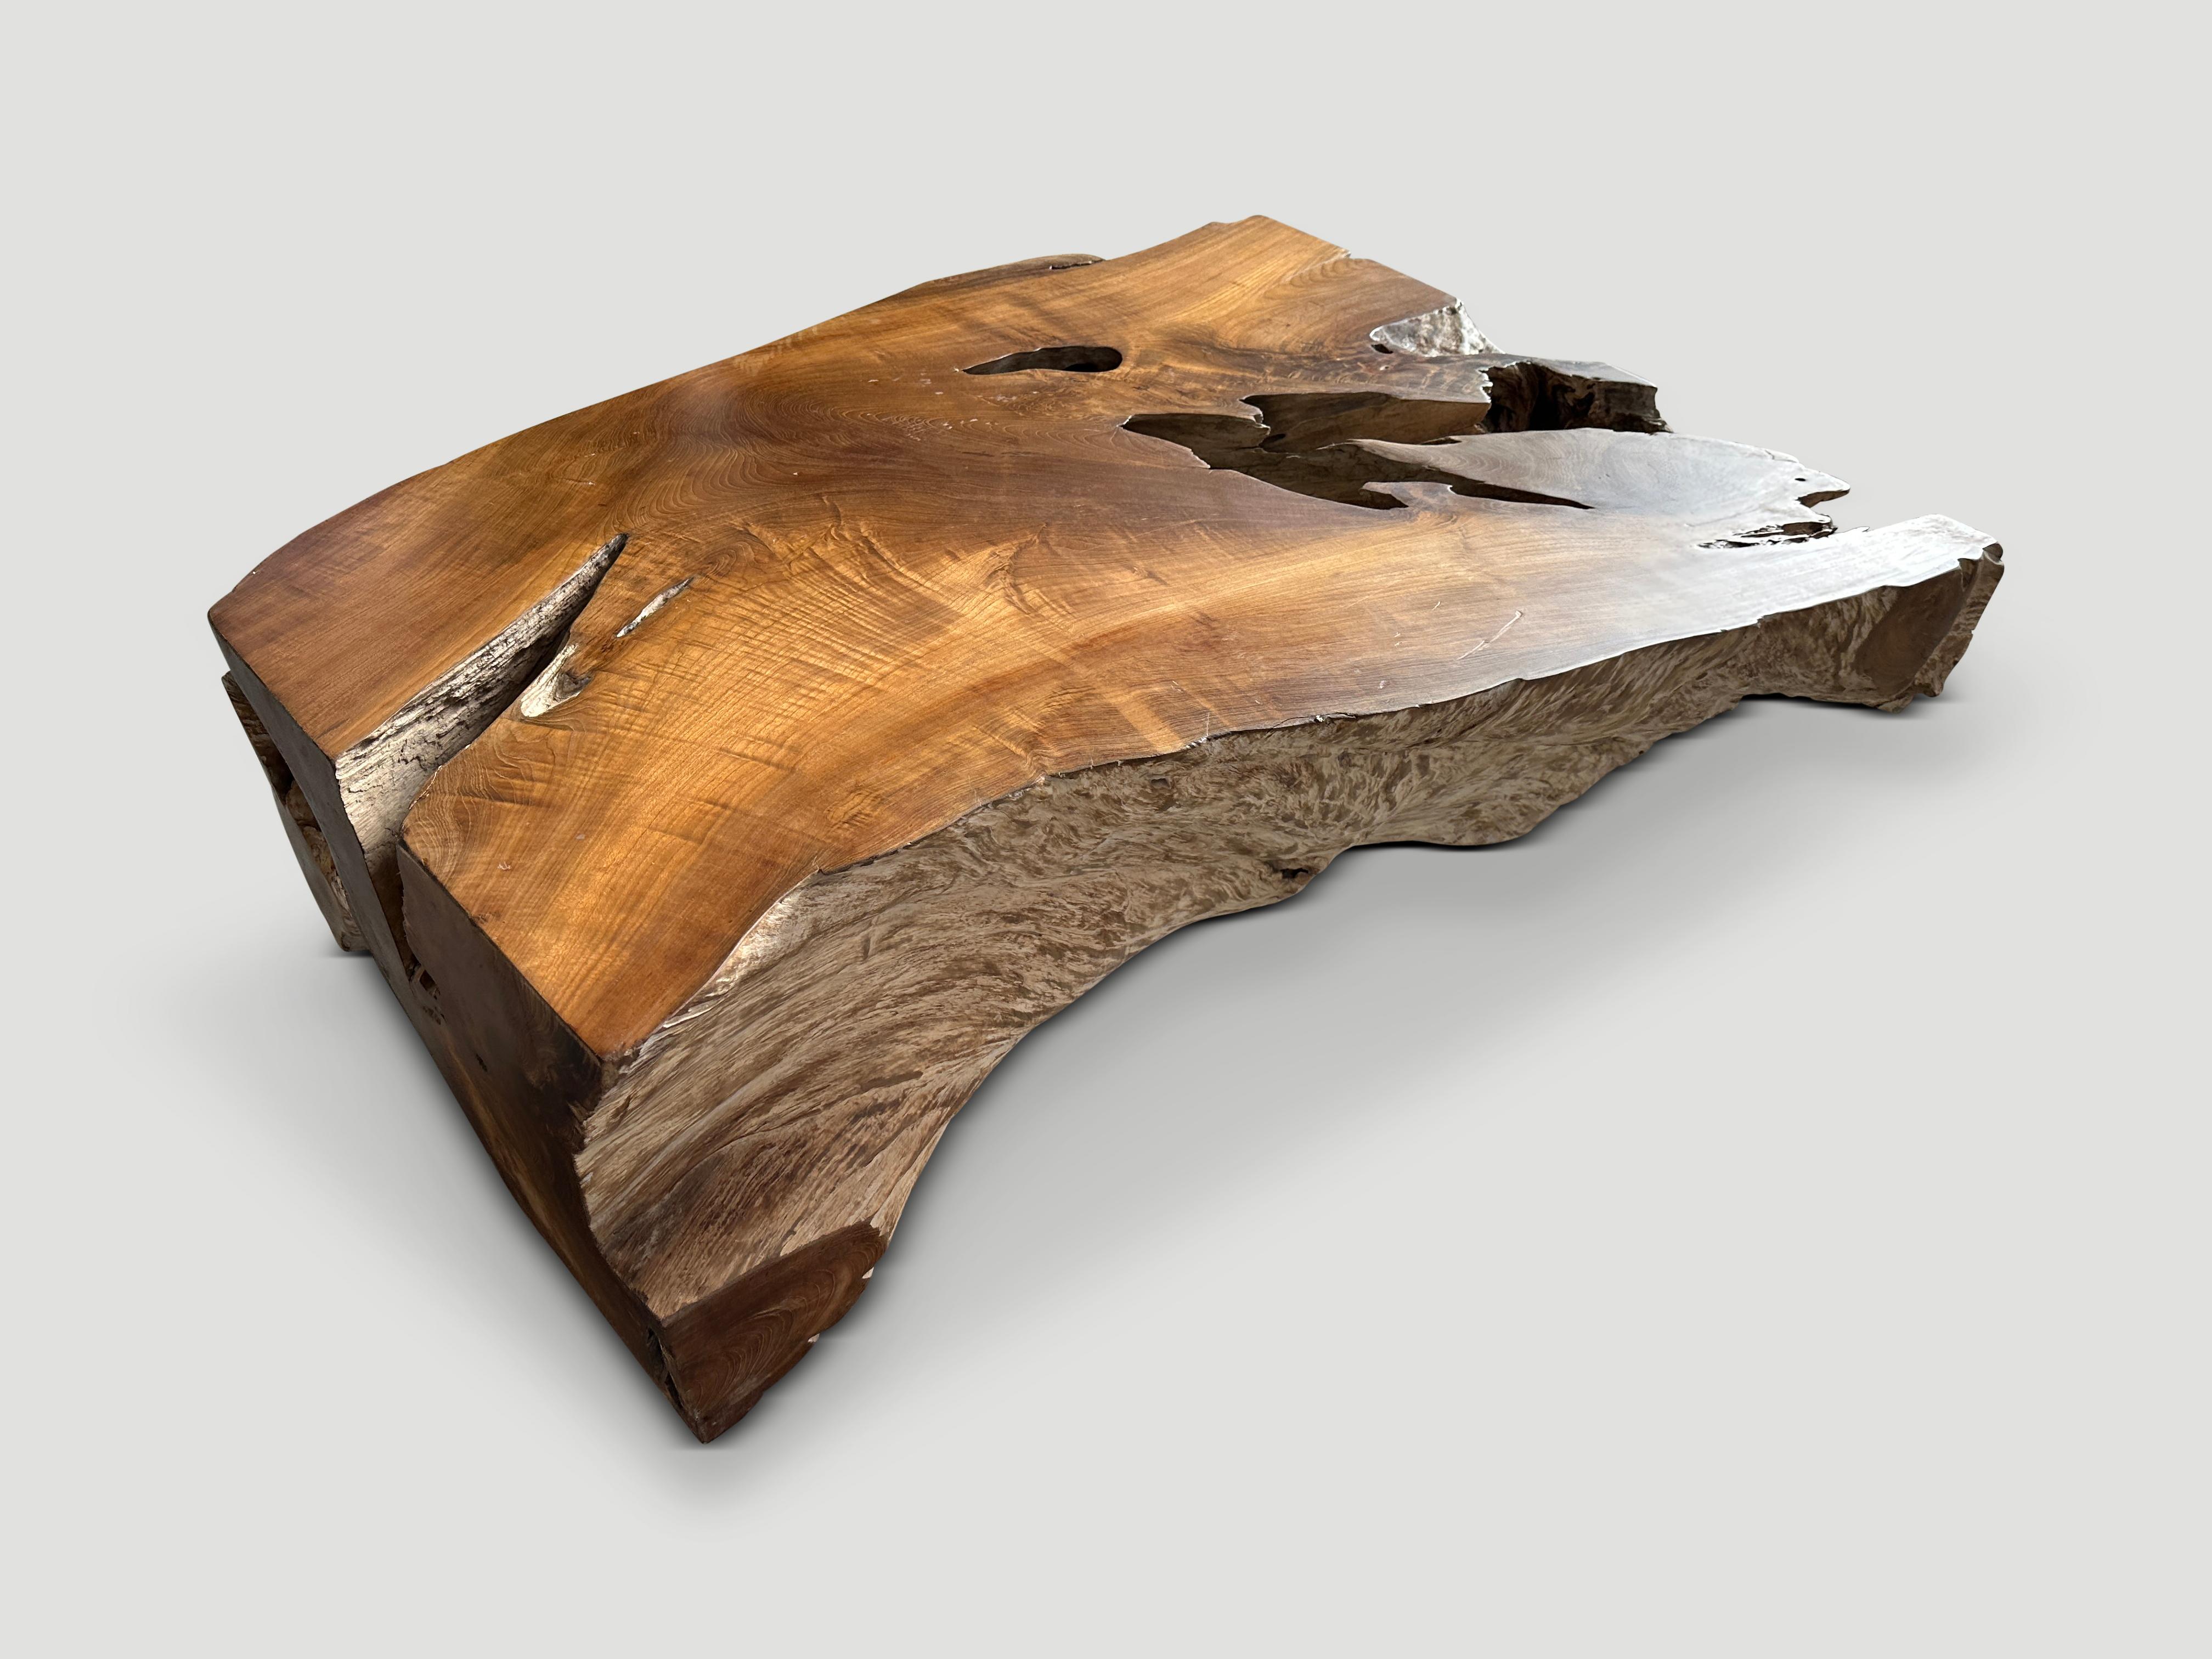 Impressive reclaimed teak root coffee table. Hand carved into this usable shape whilst respecting the natural organic wood. We polished the flat sections with a natural oil finish revealing the beautiful wood grain. The more organic sections are